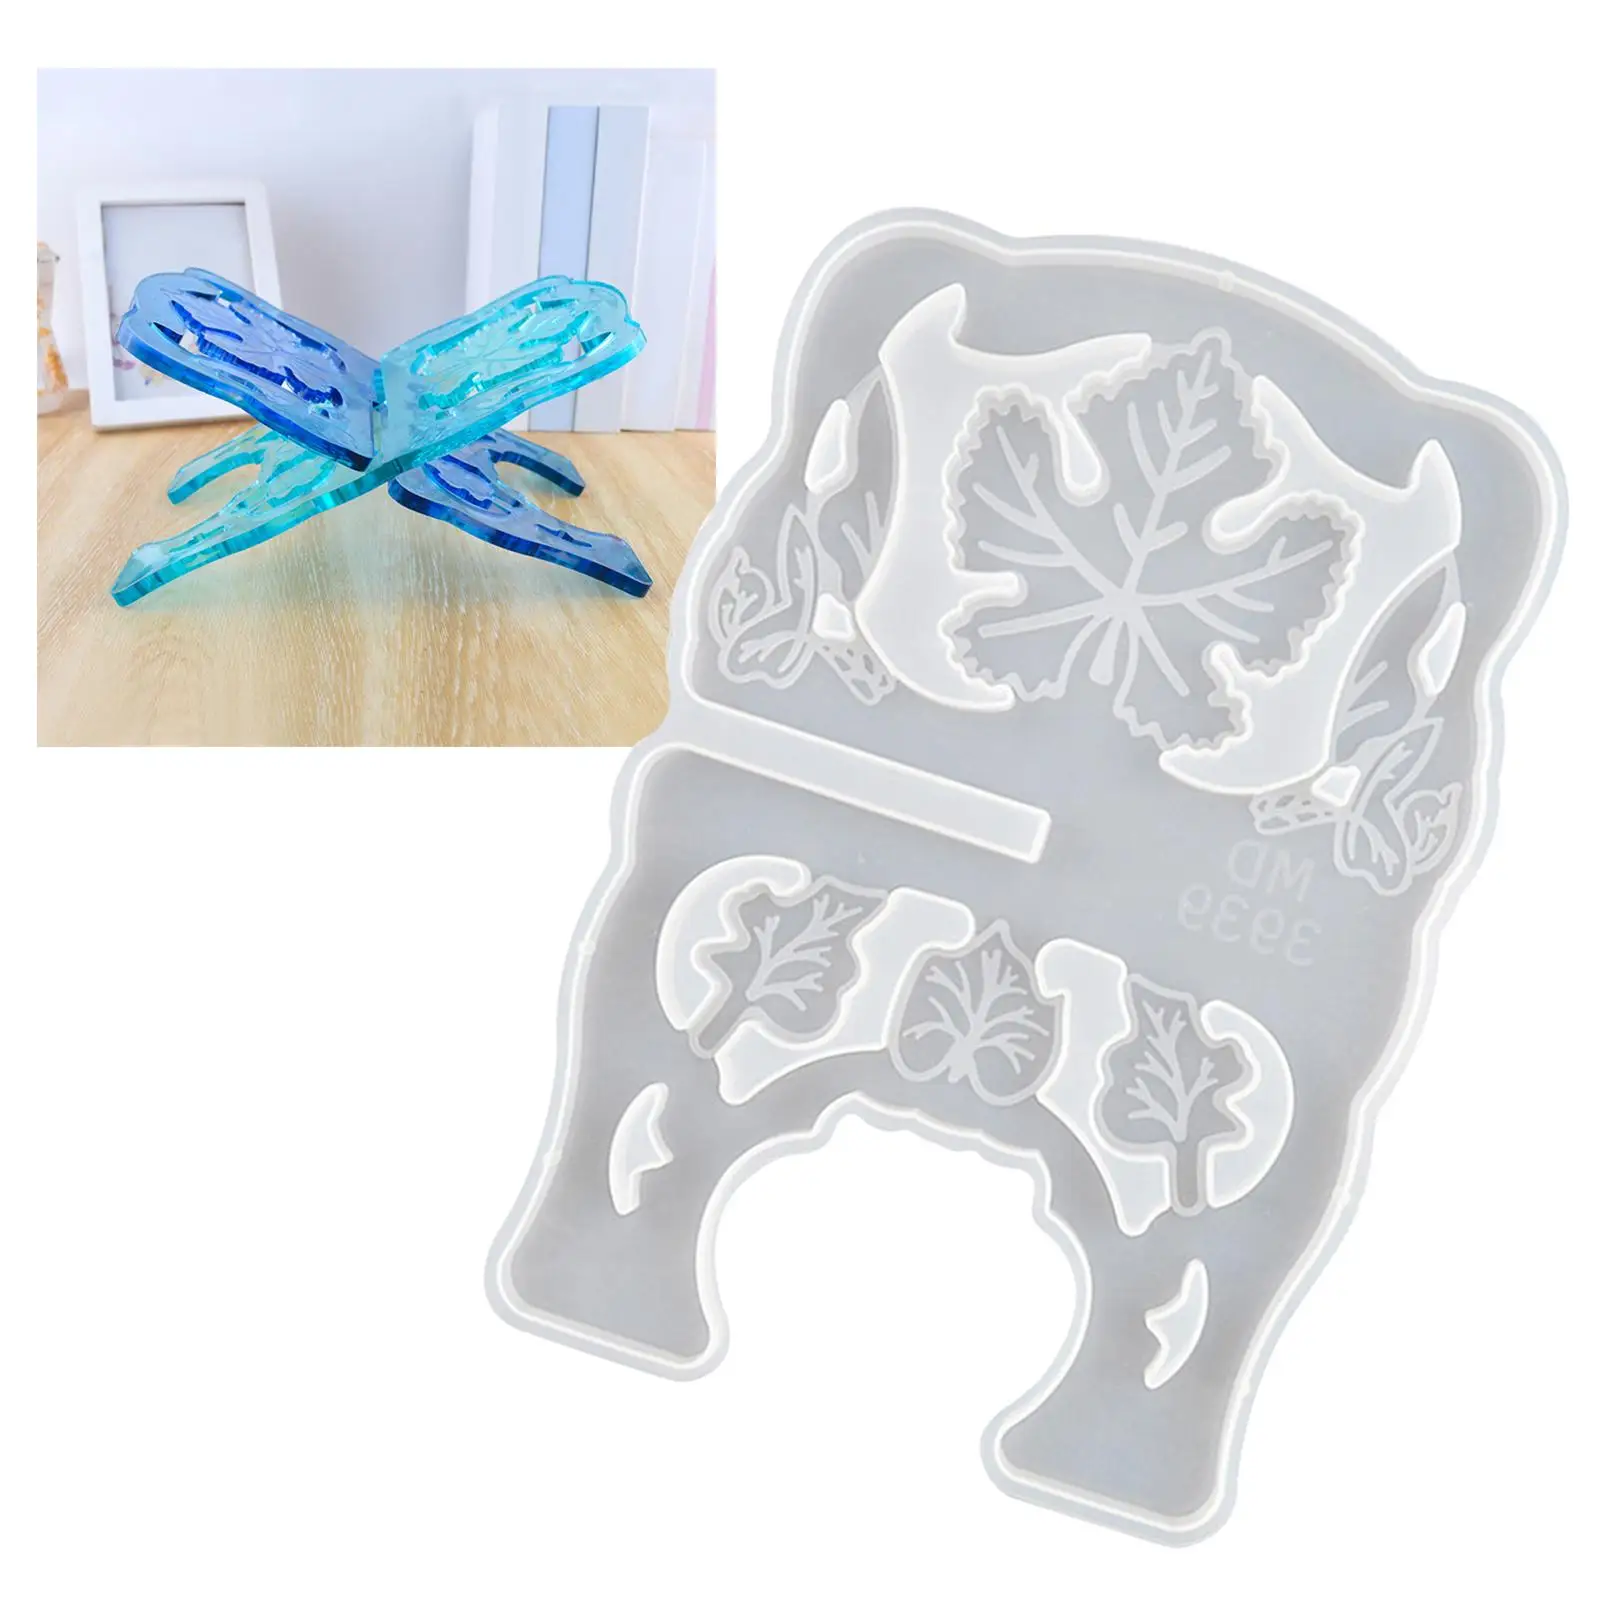 Book Holder Resin Casting DIY Epoxy Soap Crafts Silicone Supplies